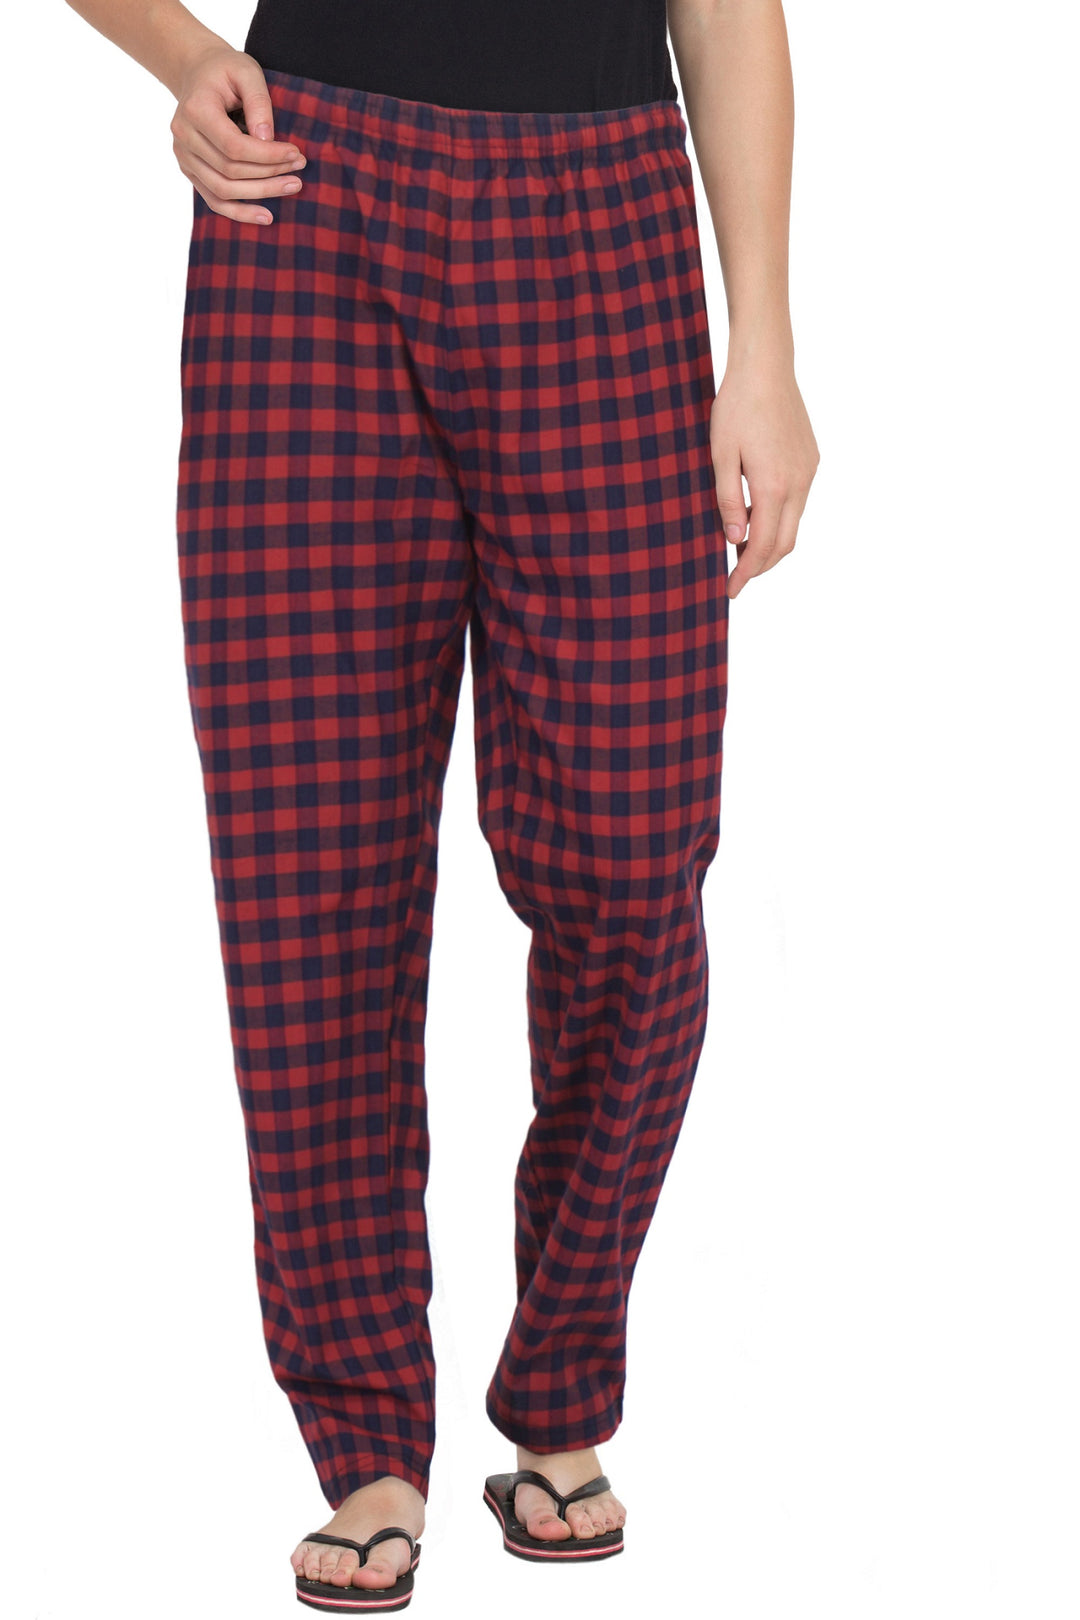 Red Christmas Pants, Chequered, Slim Fit, Long Leg, Sleepwear for Men